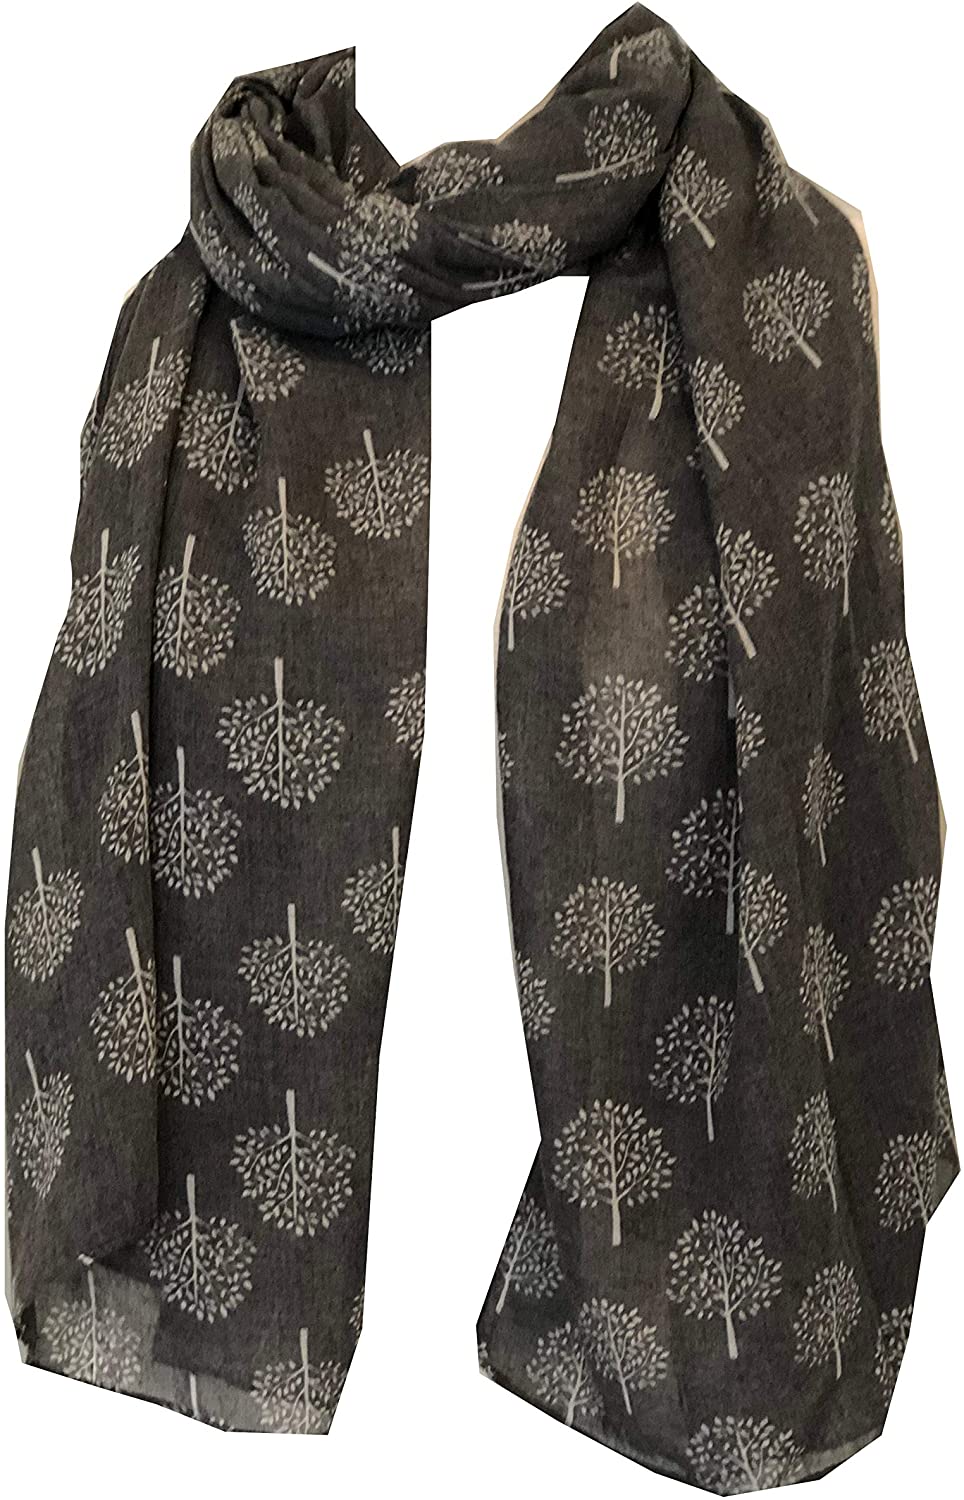 Pamper Yourself Now Dark Grey with White Mulberry Tree Design Ladies Fashion Scarves